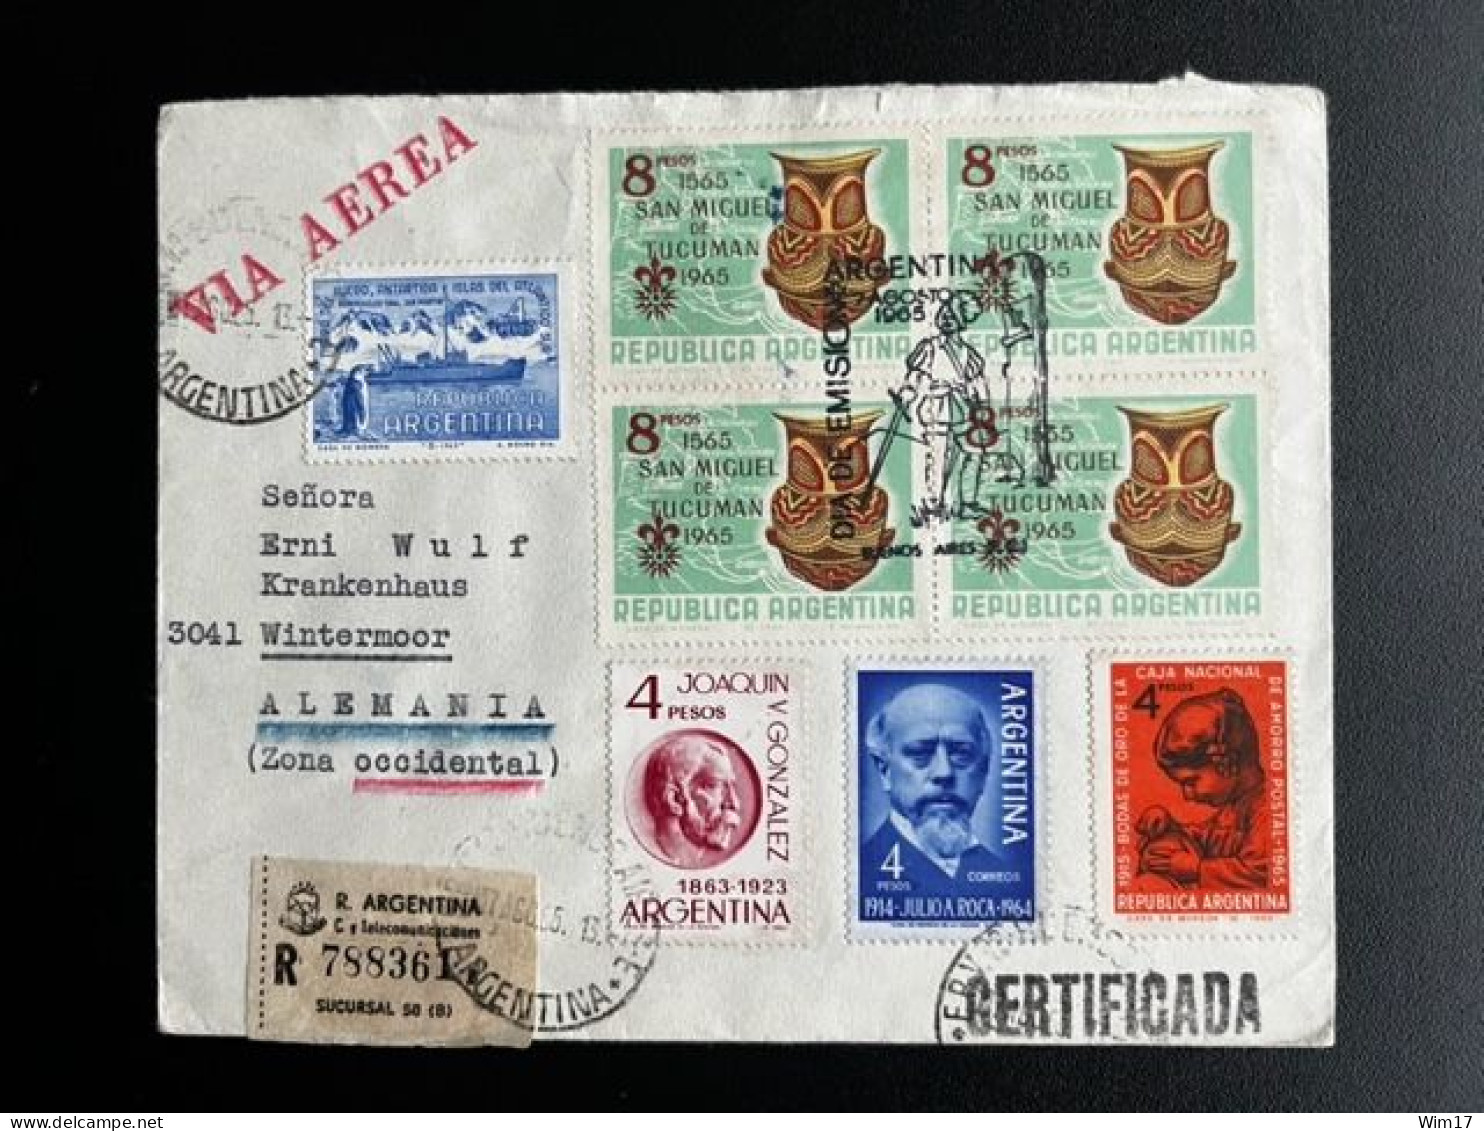 ARGENTINA 1965 REGISTERED AIR MAIL LETTER BUENOS AIRES TO WINTERMOOR 07-08-1965 CERTIFICADO - Storia Postale